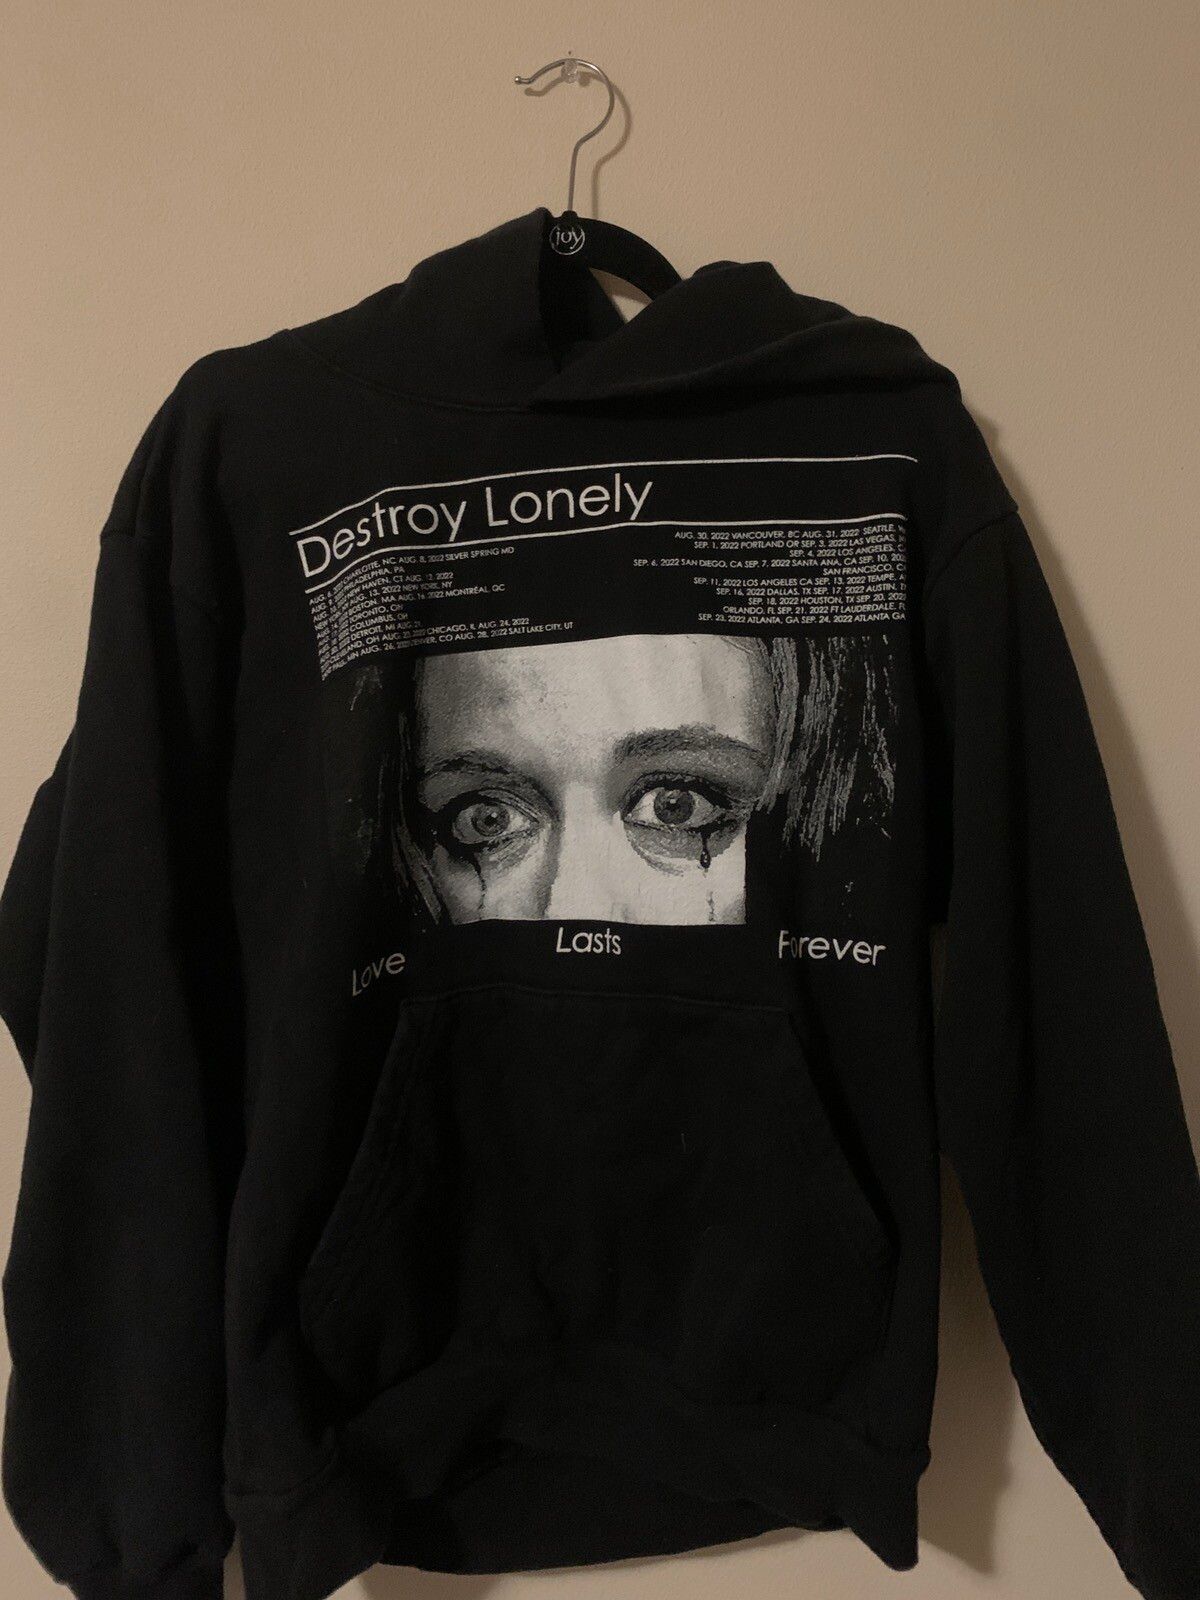 Playboi Carti Destroy lonely “Love lasts forever” hoodie | Grailed